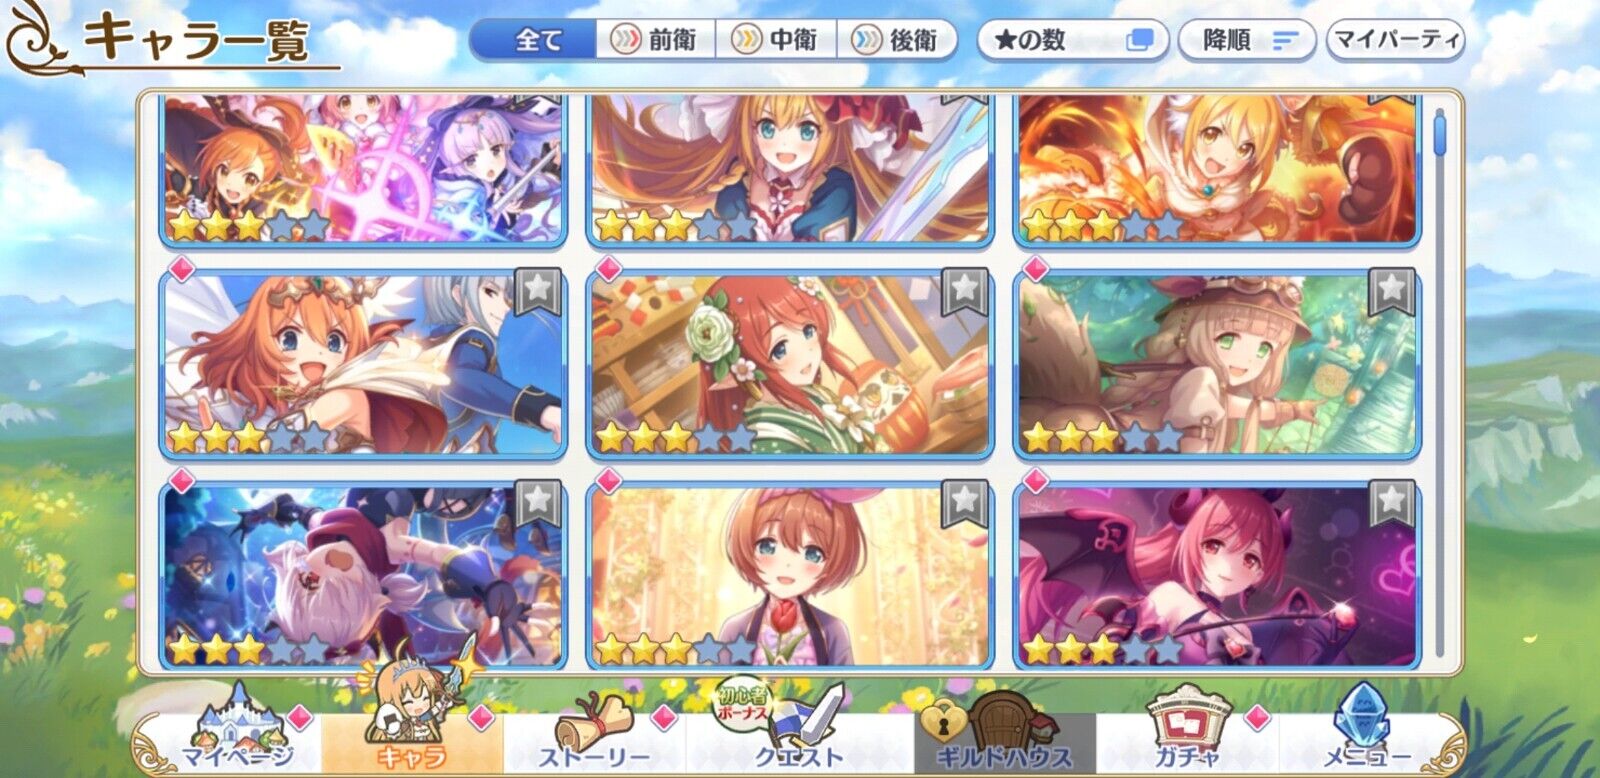 [JP][INSTANT] Priconne 41x3* +200k Jewels 6x3* tickets Starter Account Princess Connect Re:Dive-Mobile Games Starter